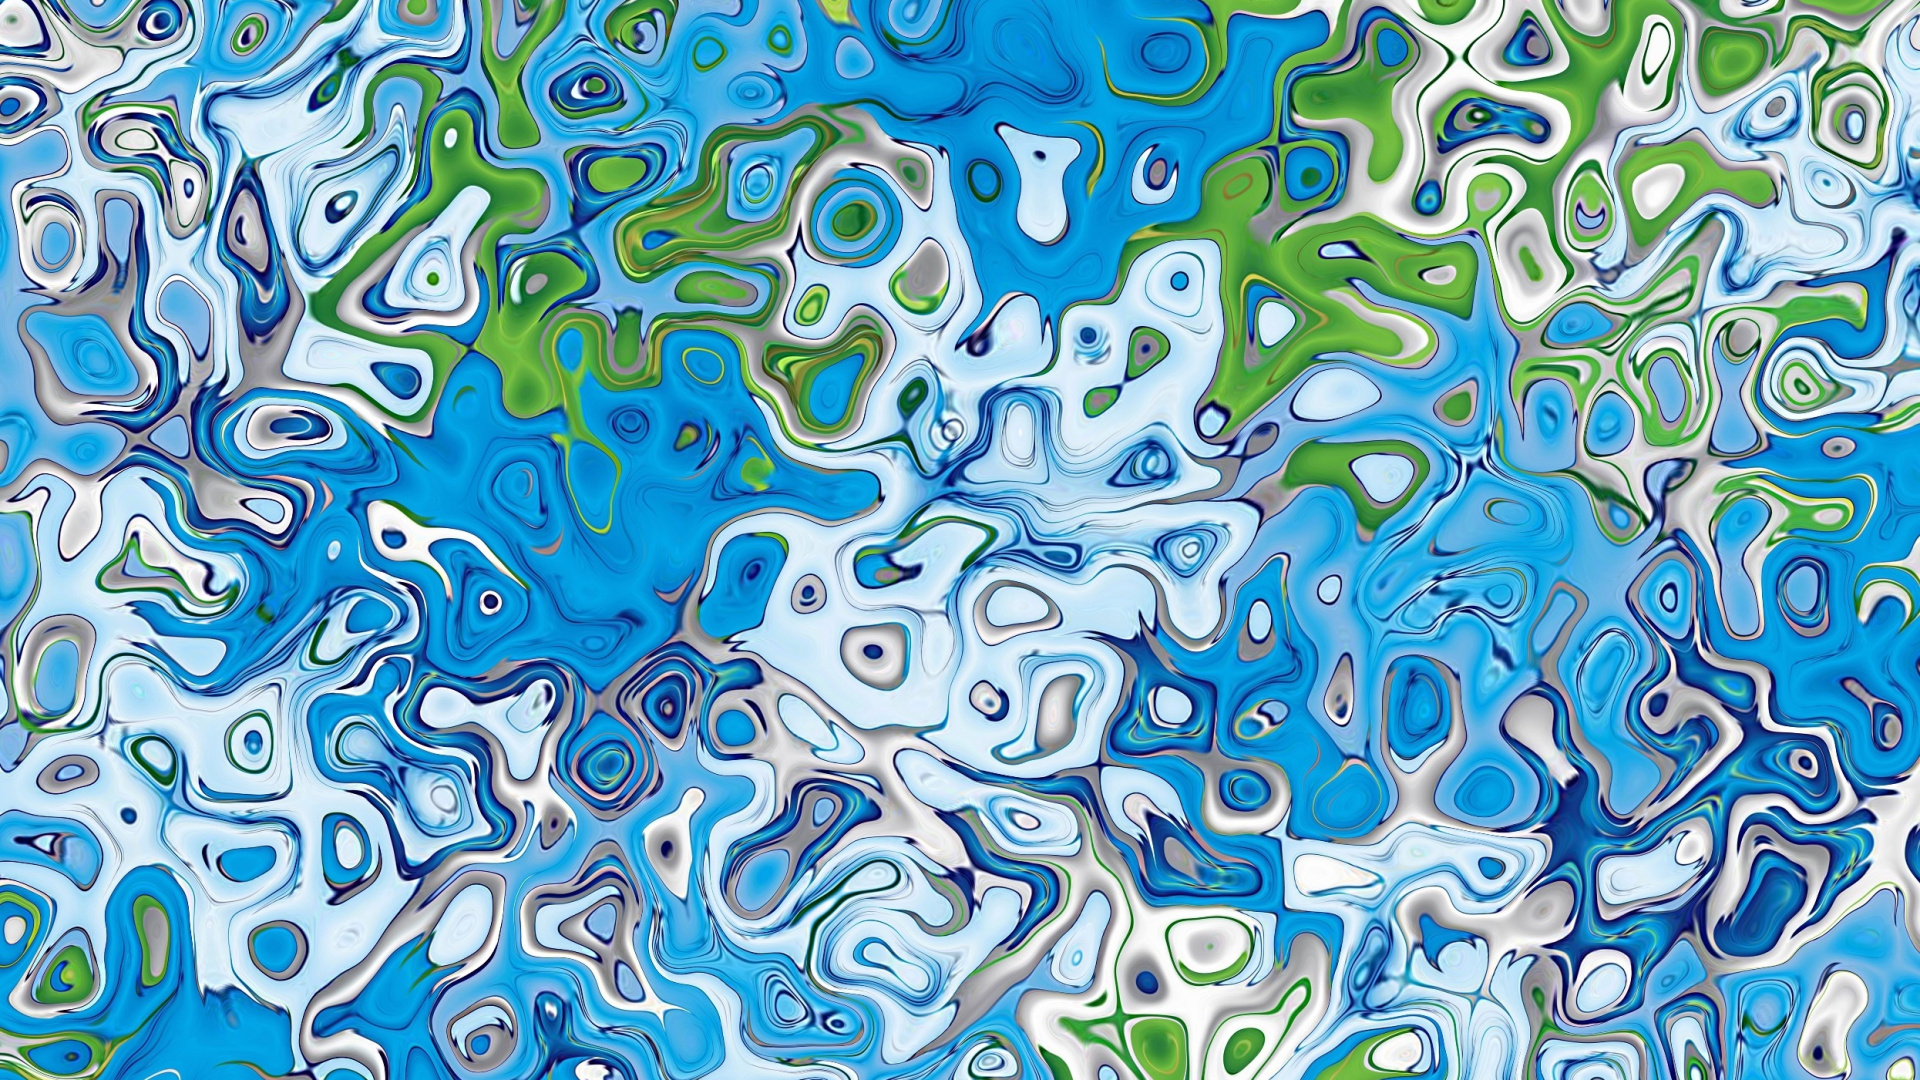 Green Blue and White Abstract Painting. Wallpaper in 1920x1080 Resolution